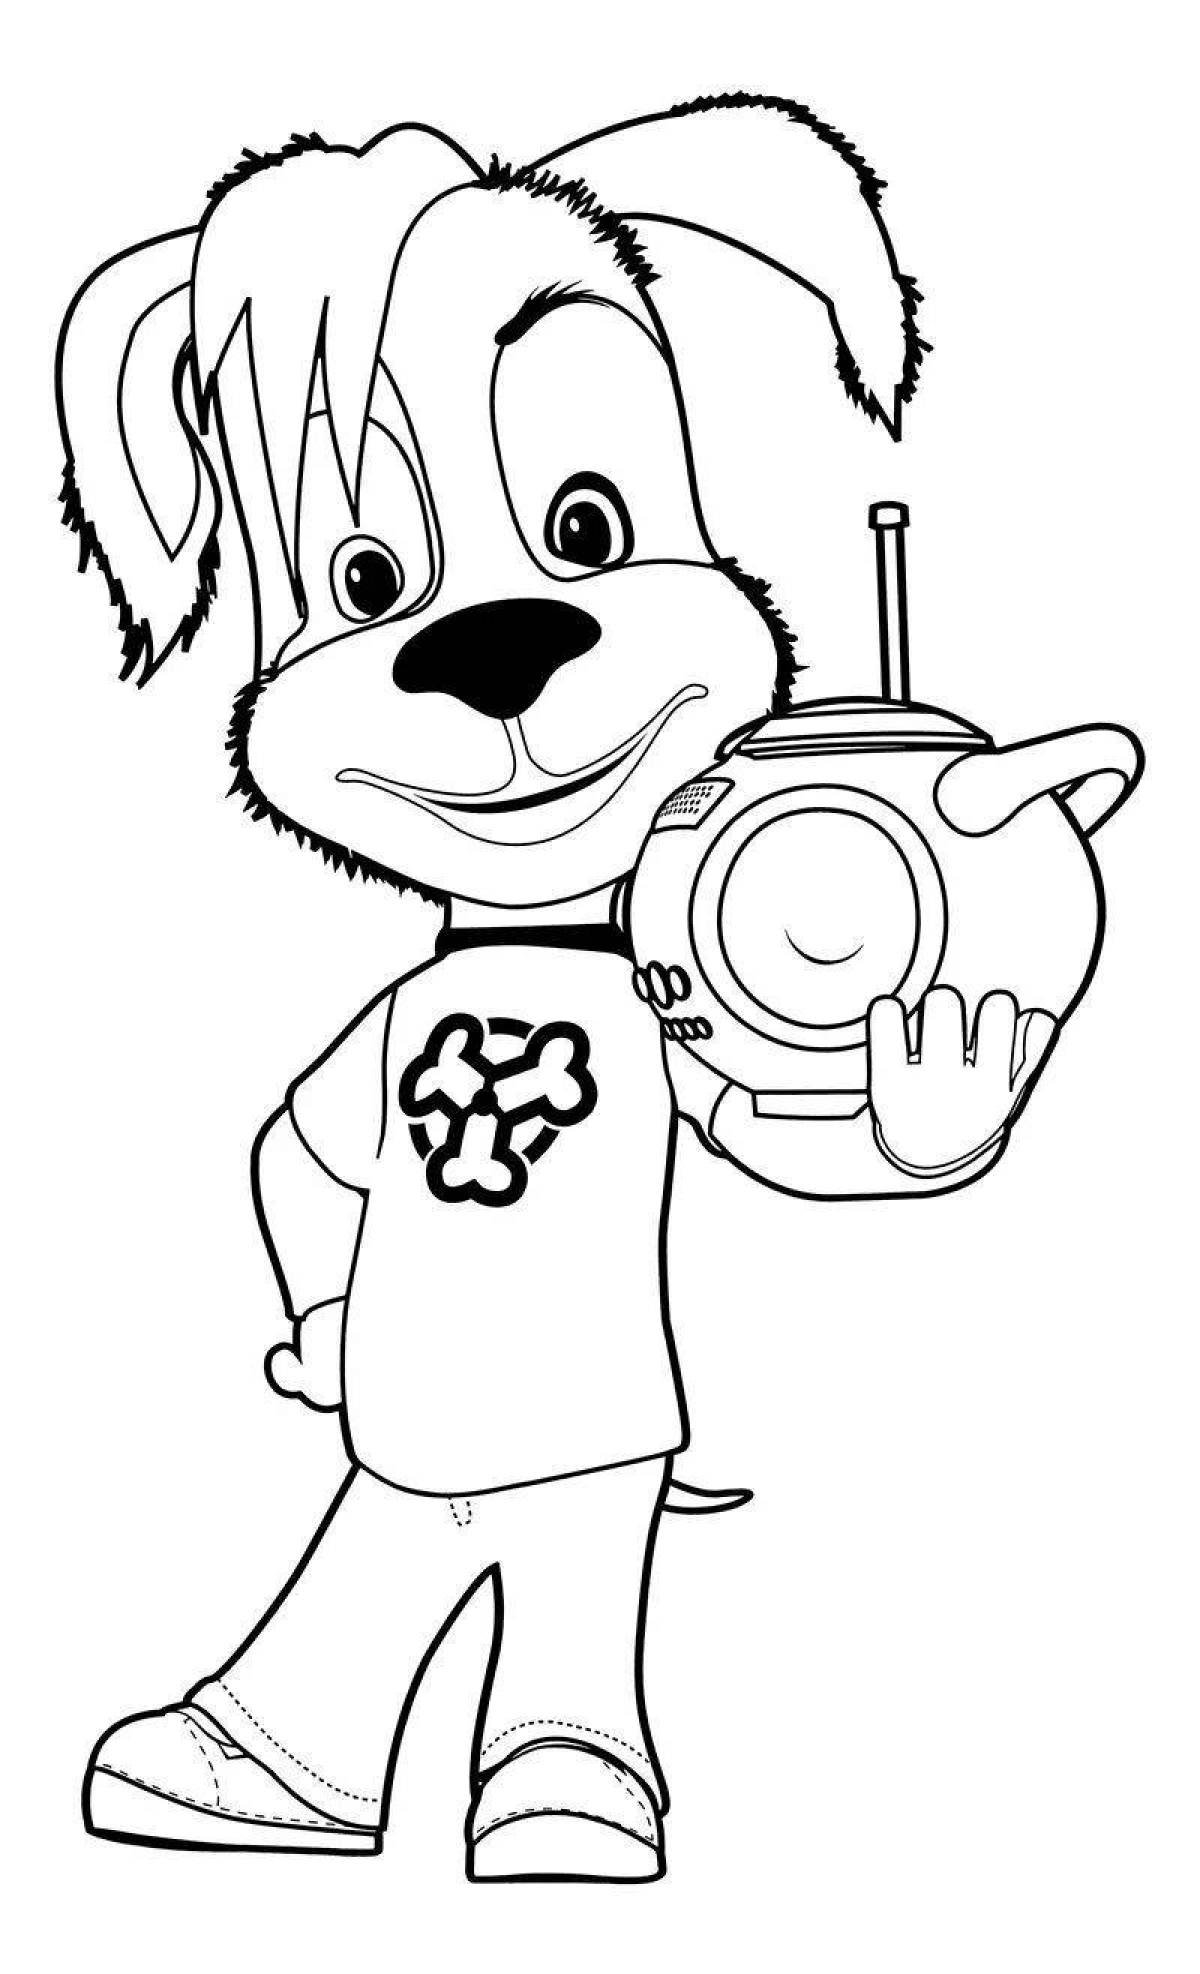 Amazing Barboskin cartoon coloring pages